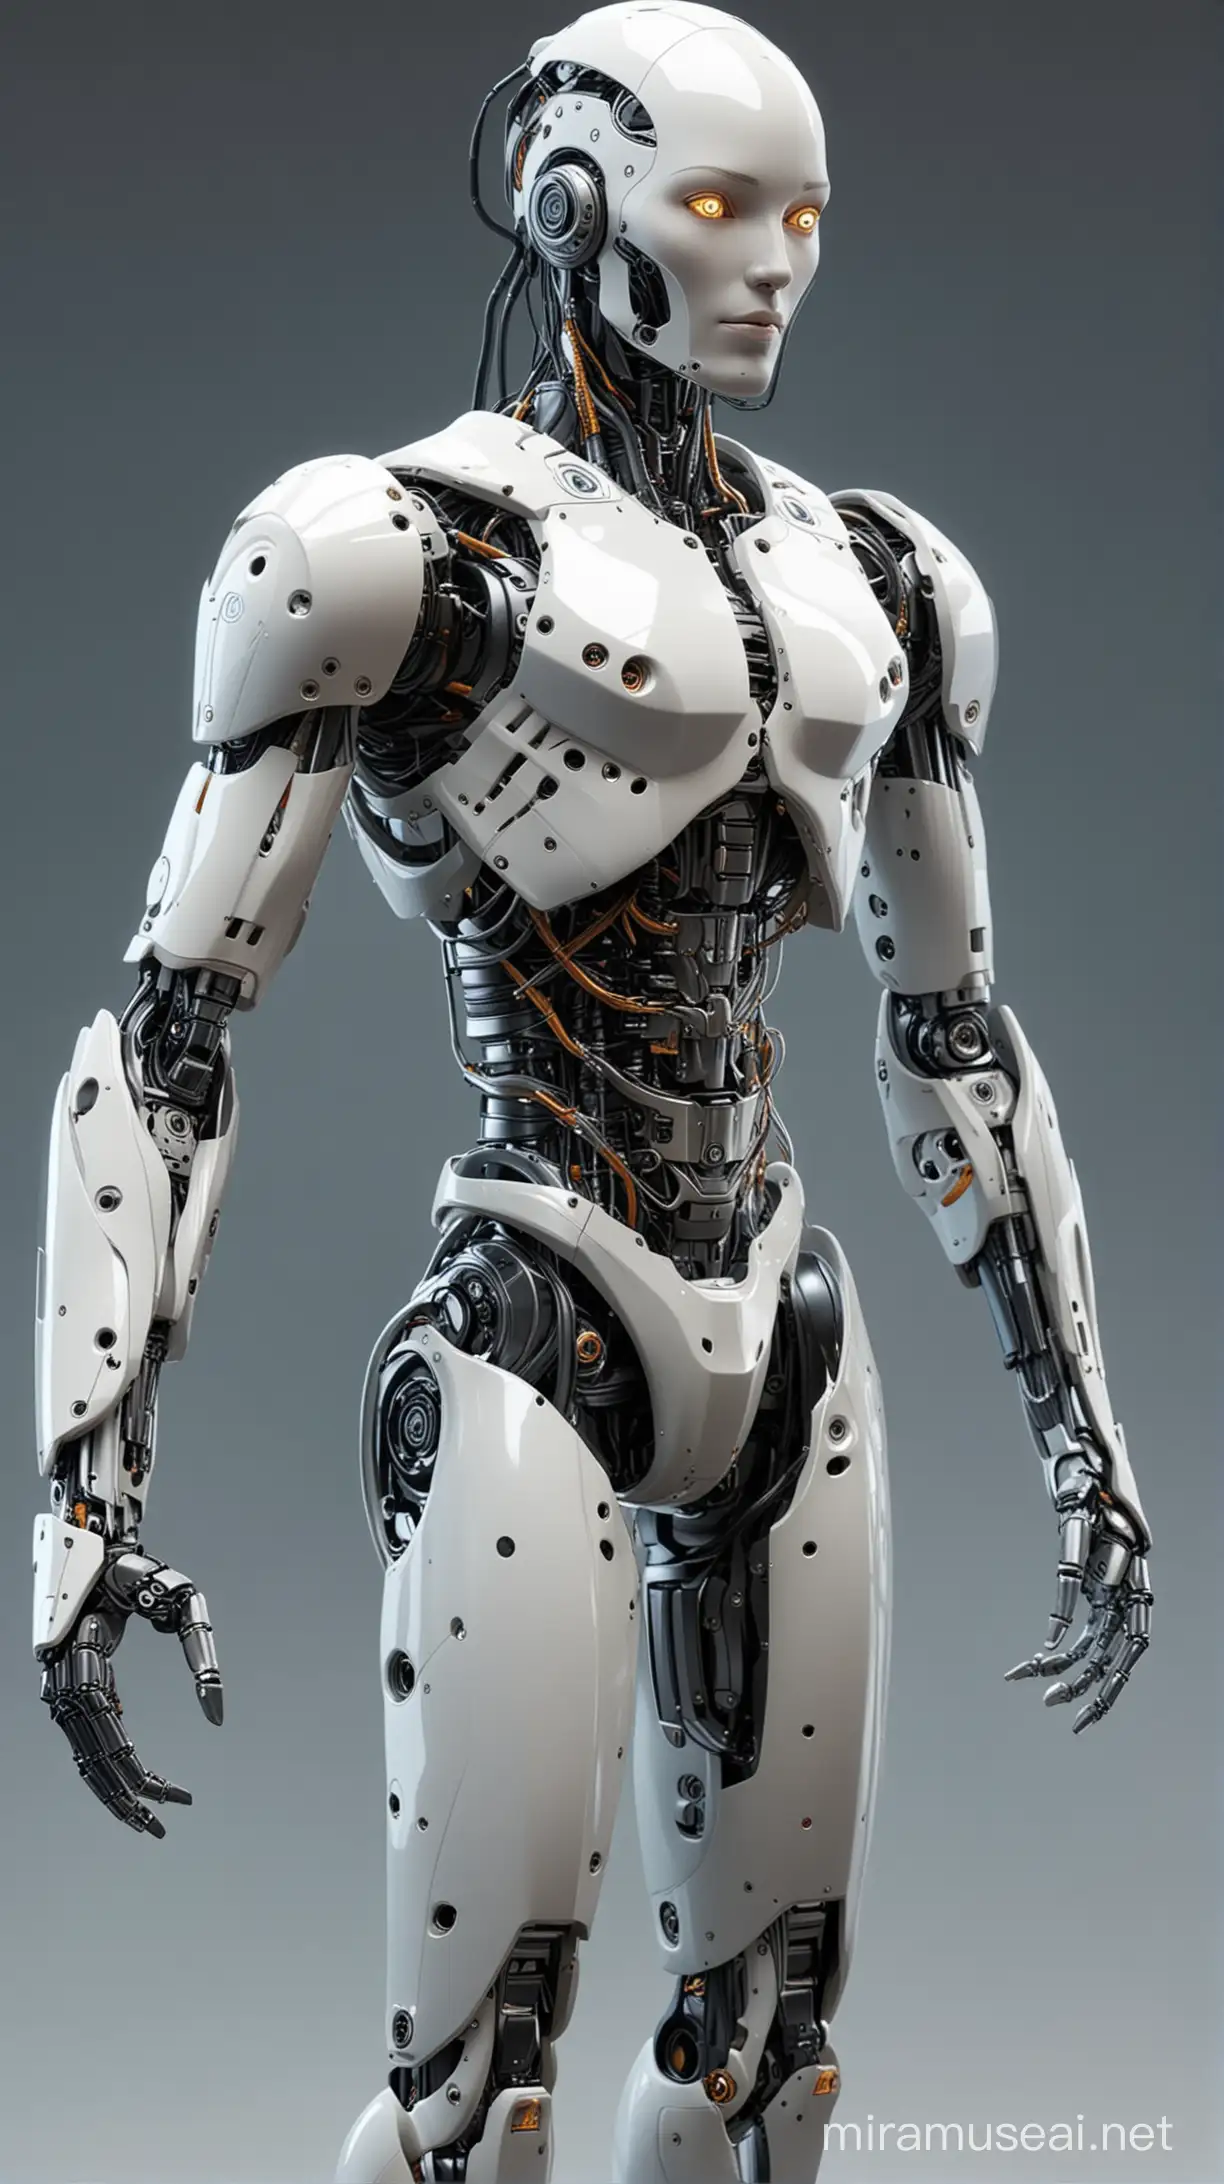 Humanoid Robot with Detailed Mechanical Features